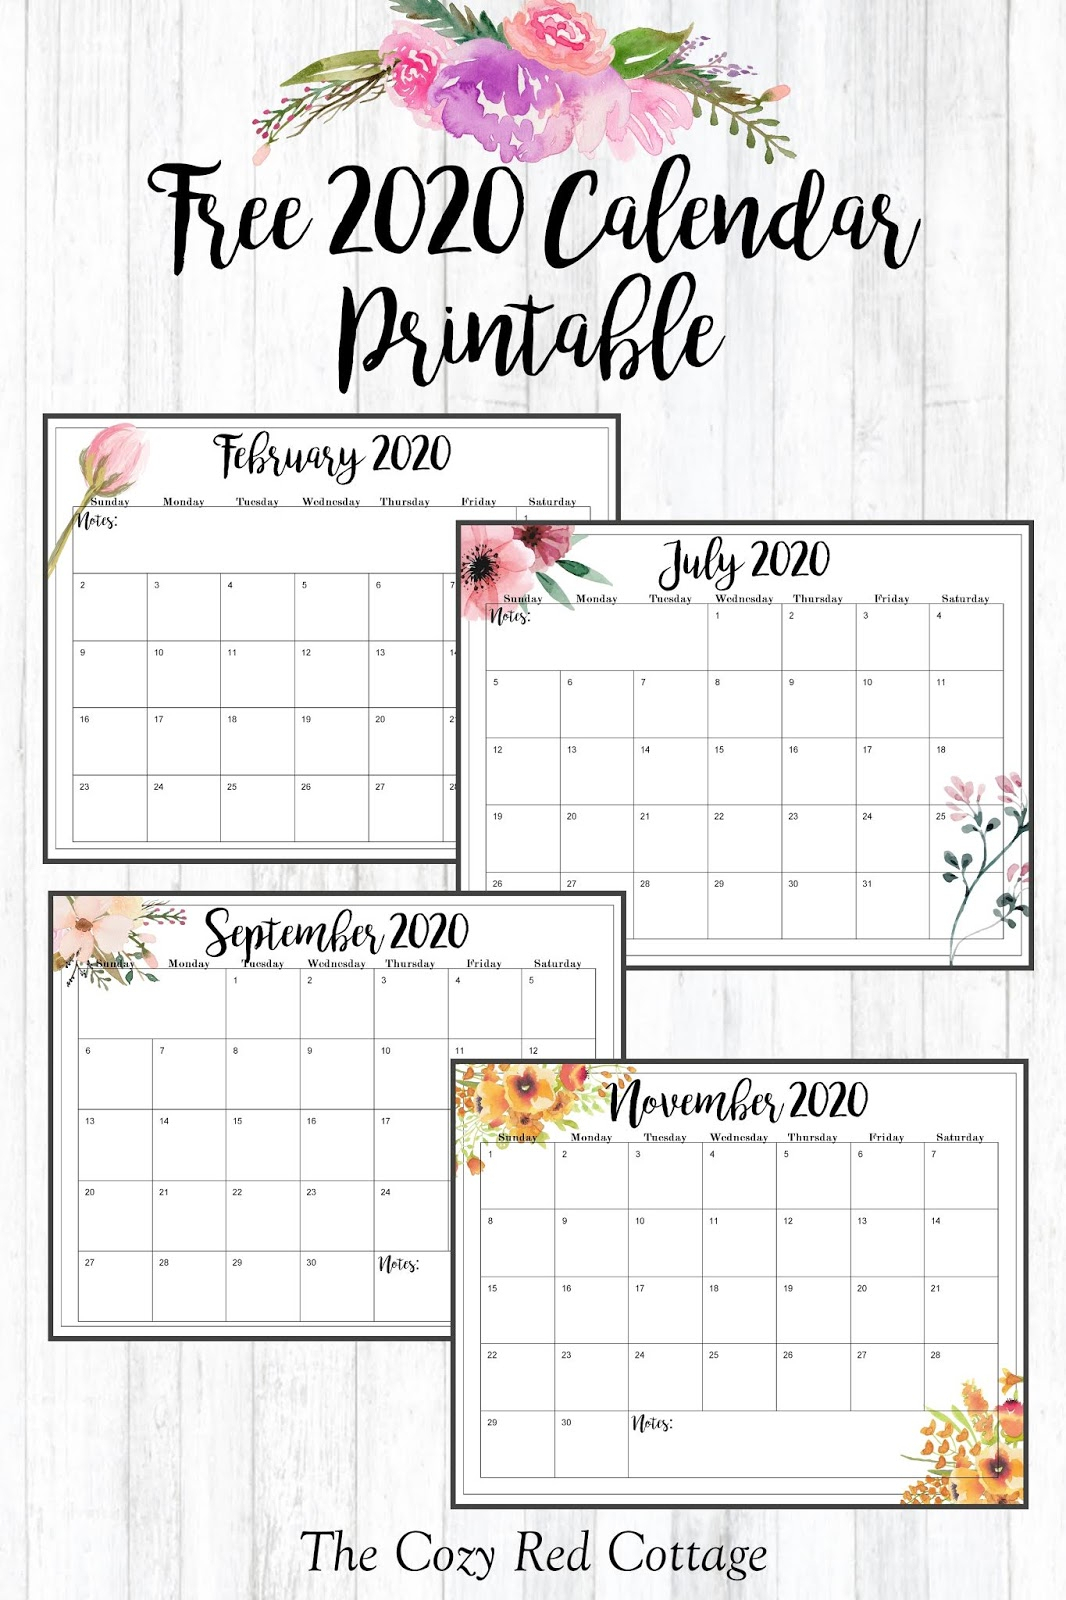 The Cozy Red Cottage: 2020 Calendar (Free Printables) with regard to December Calendar 2020 Pinterest